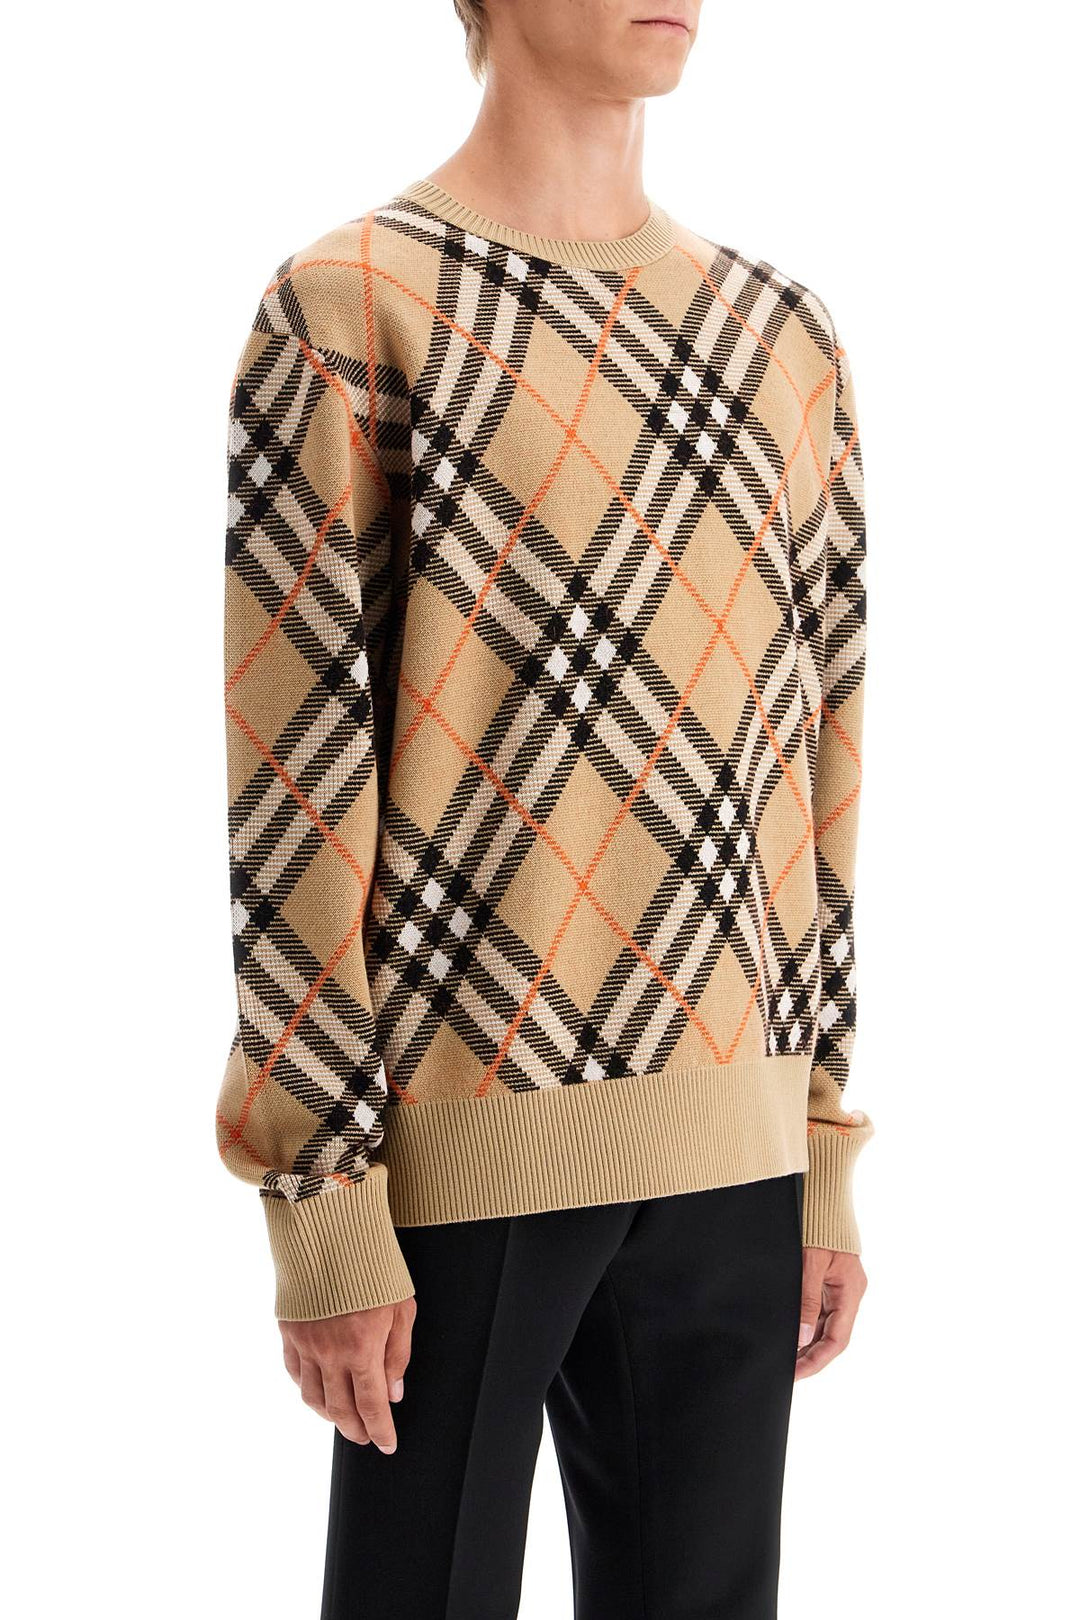 Burberry Ered Wool And Mohair Pullover Sweater   Beige